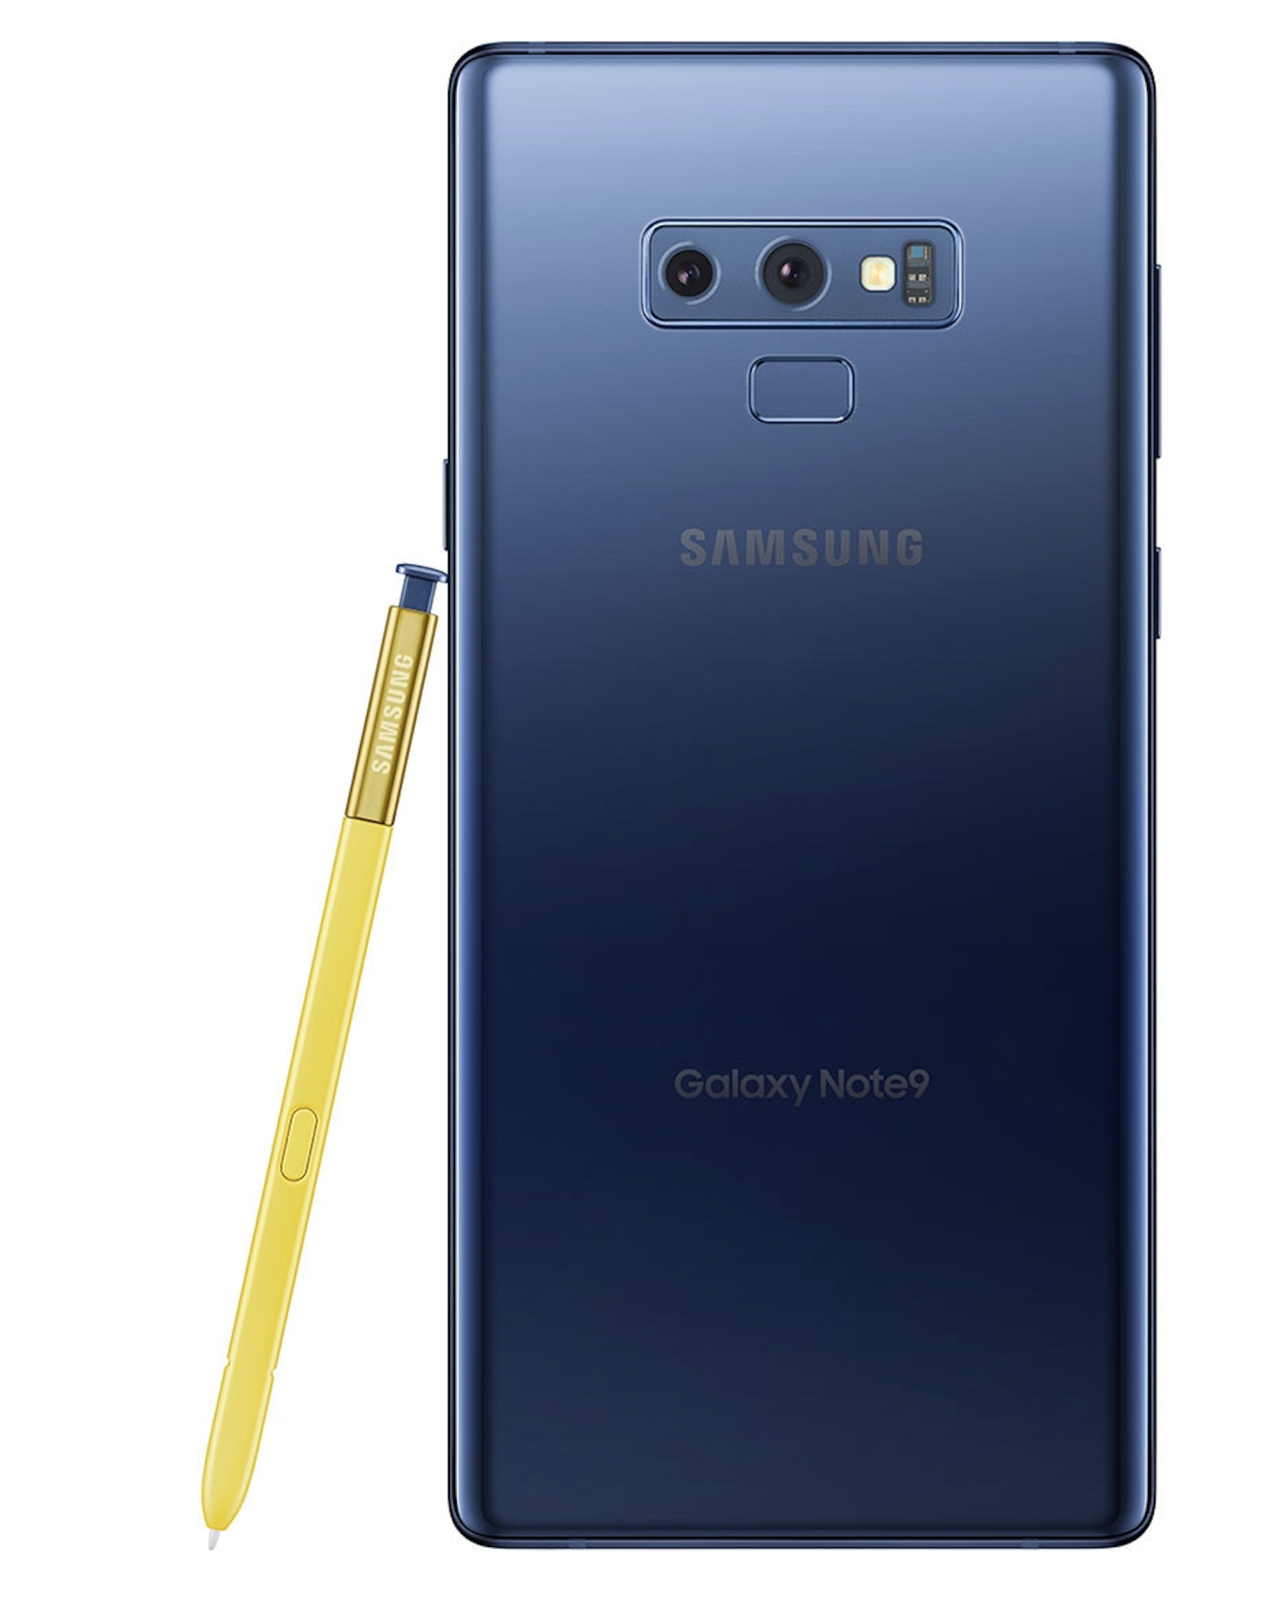 Samsung Galaxy Note 9 Set For January 15 Update To Android 9 Pie Notebookcheck Net News